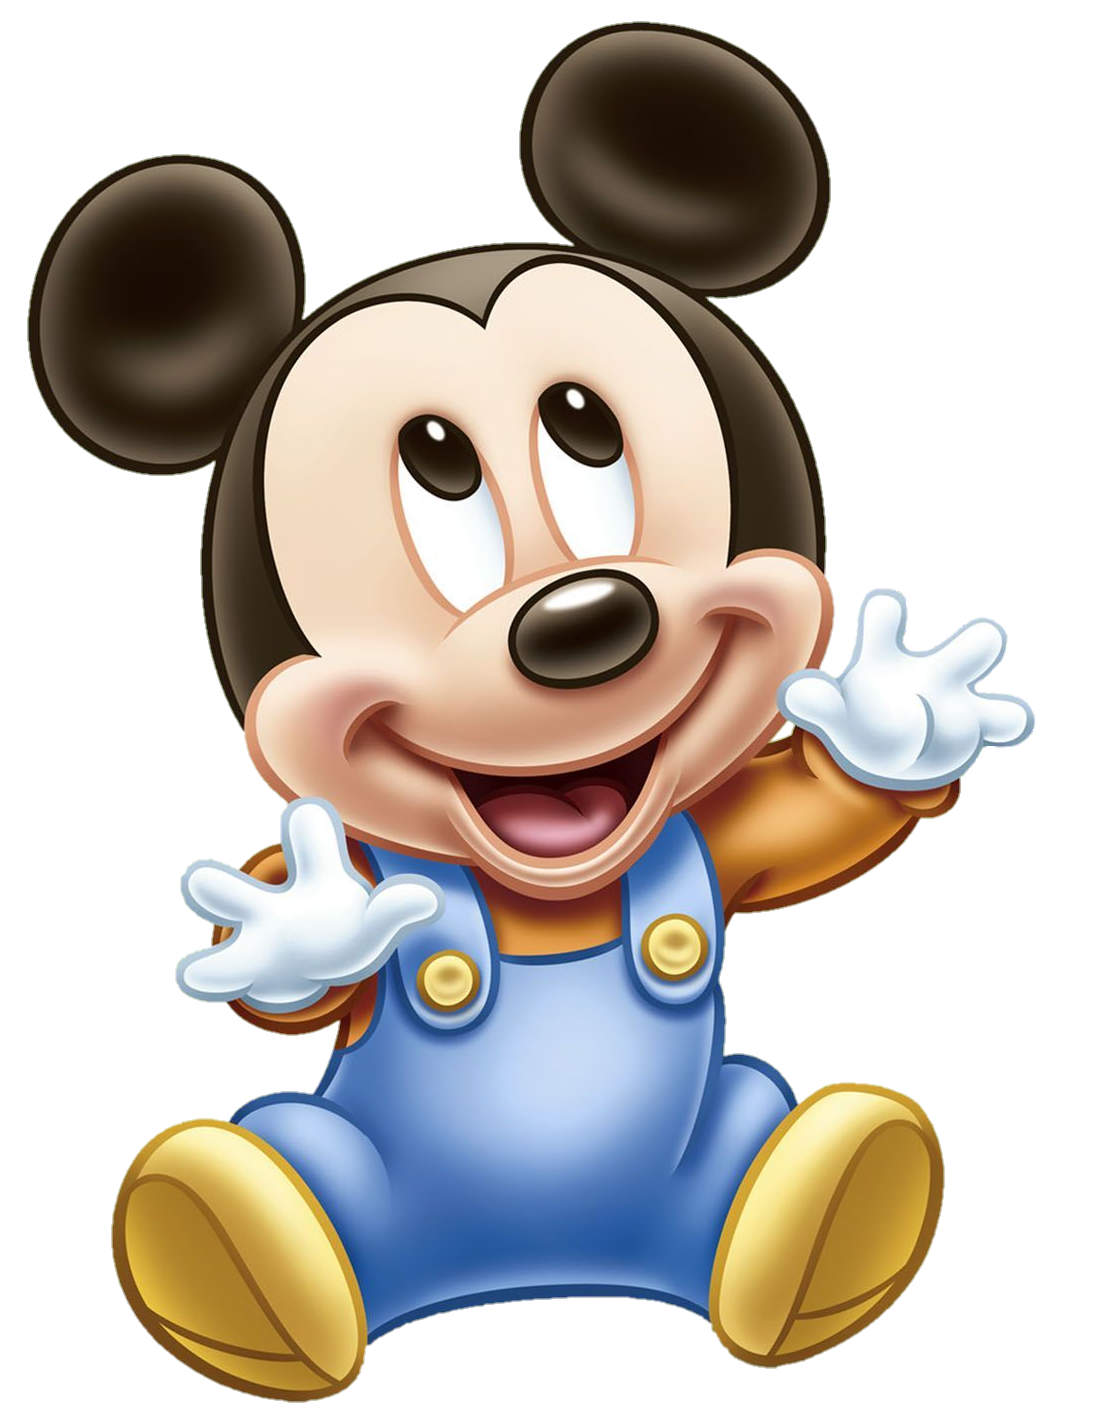 mickey-mouse-png-from-pngfre-22